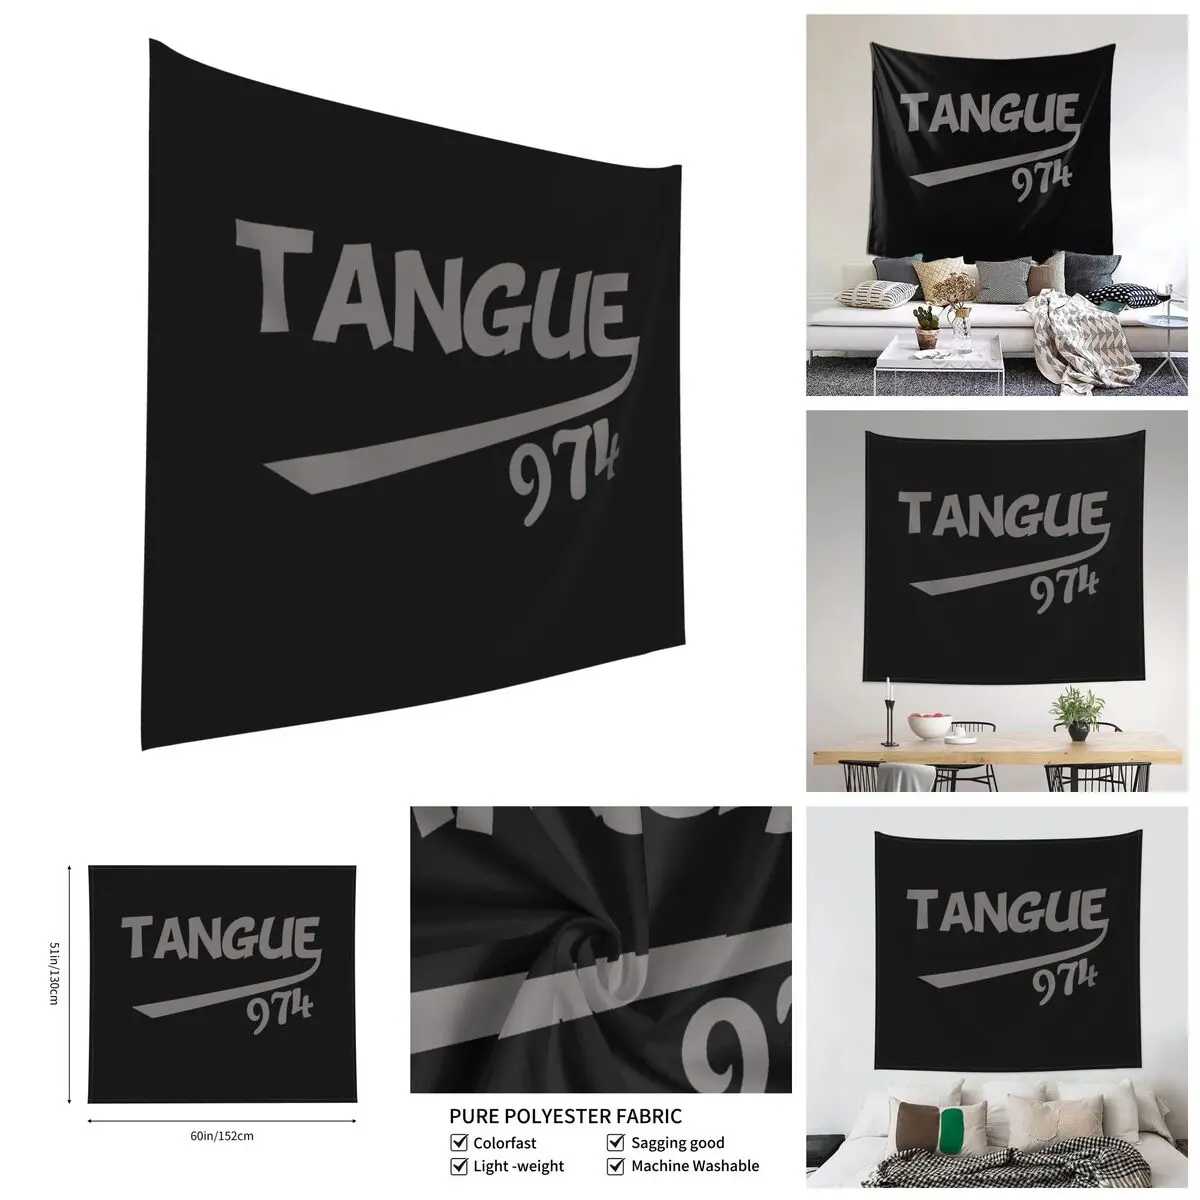 

Tangue 974 Reunion Islandby B Buzz Tapestry Hot Sale Tapestries Print Funny Sarcastic R248 decorative paintings